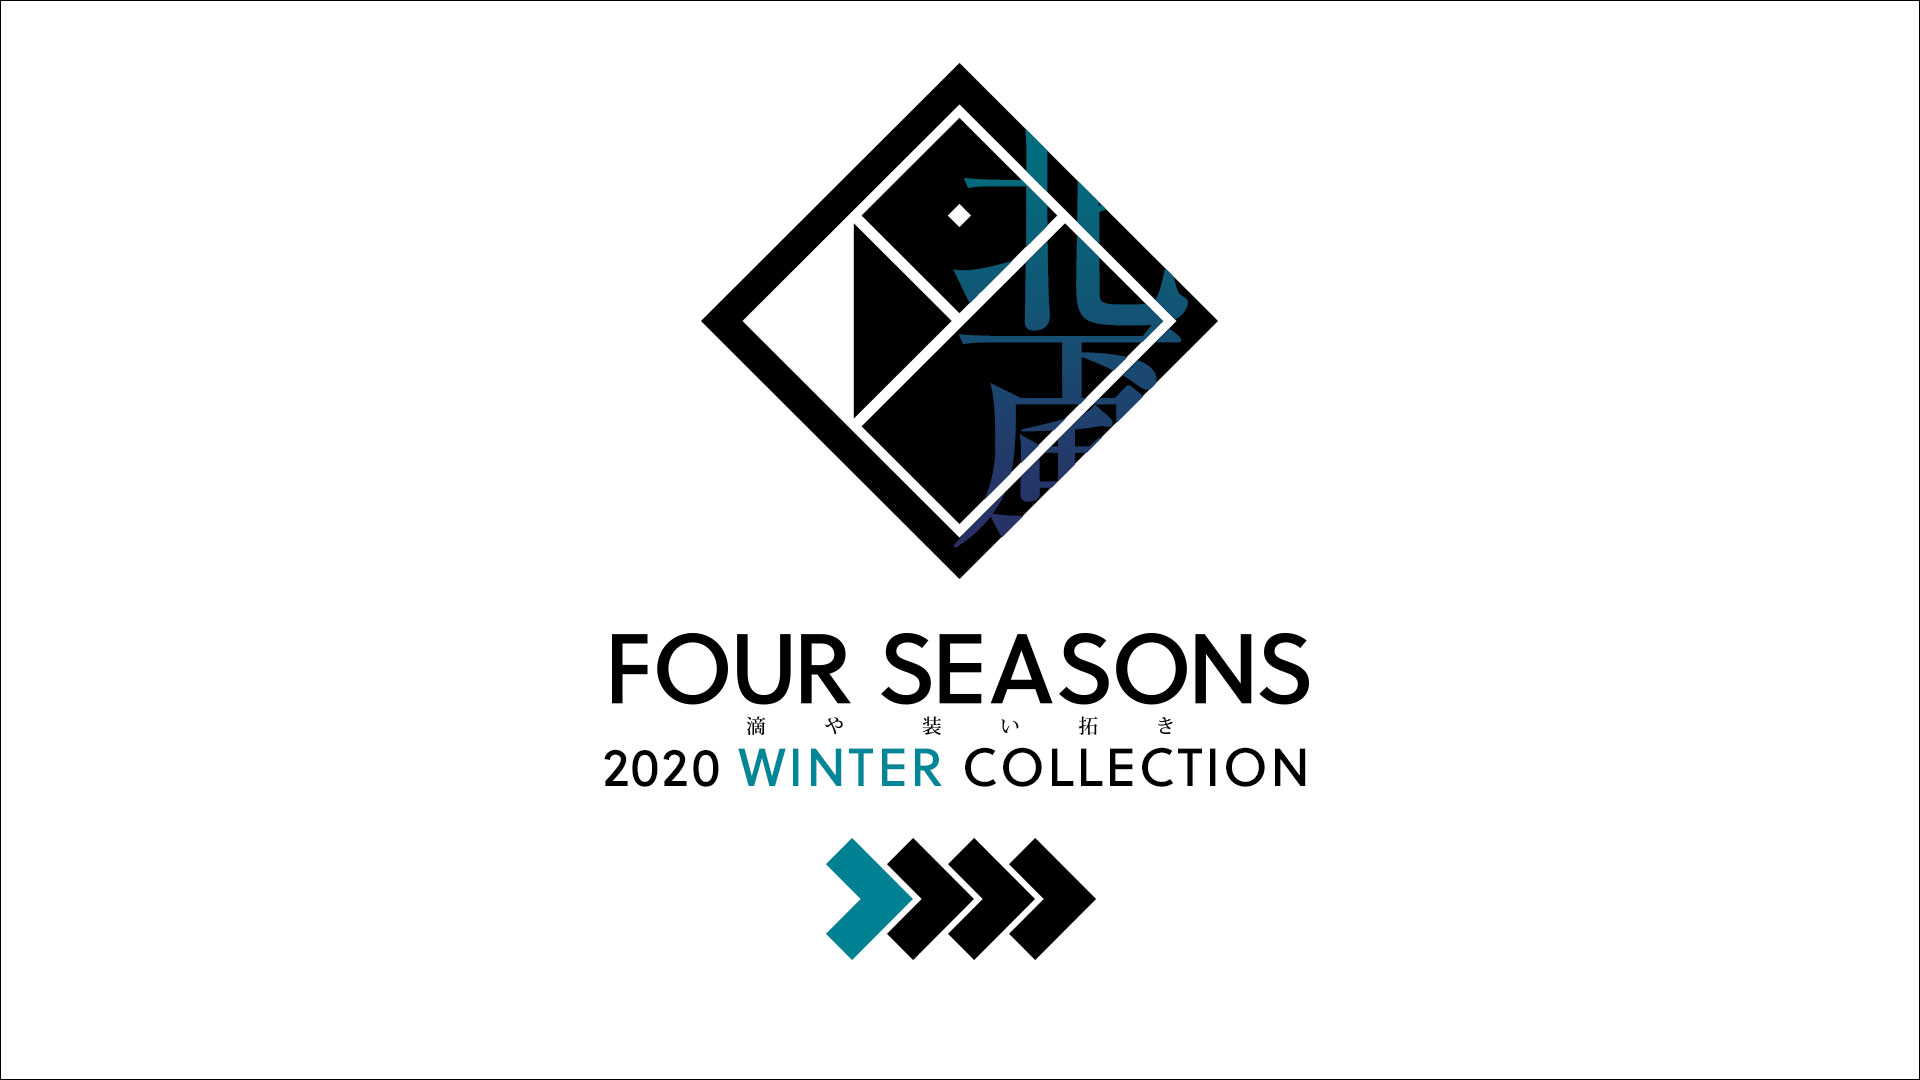 [PHOTO:FOUR SEASONS 2020 WINTER COLLECTION]